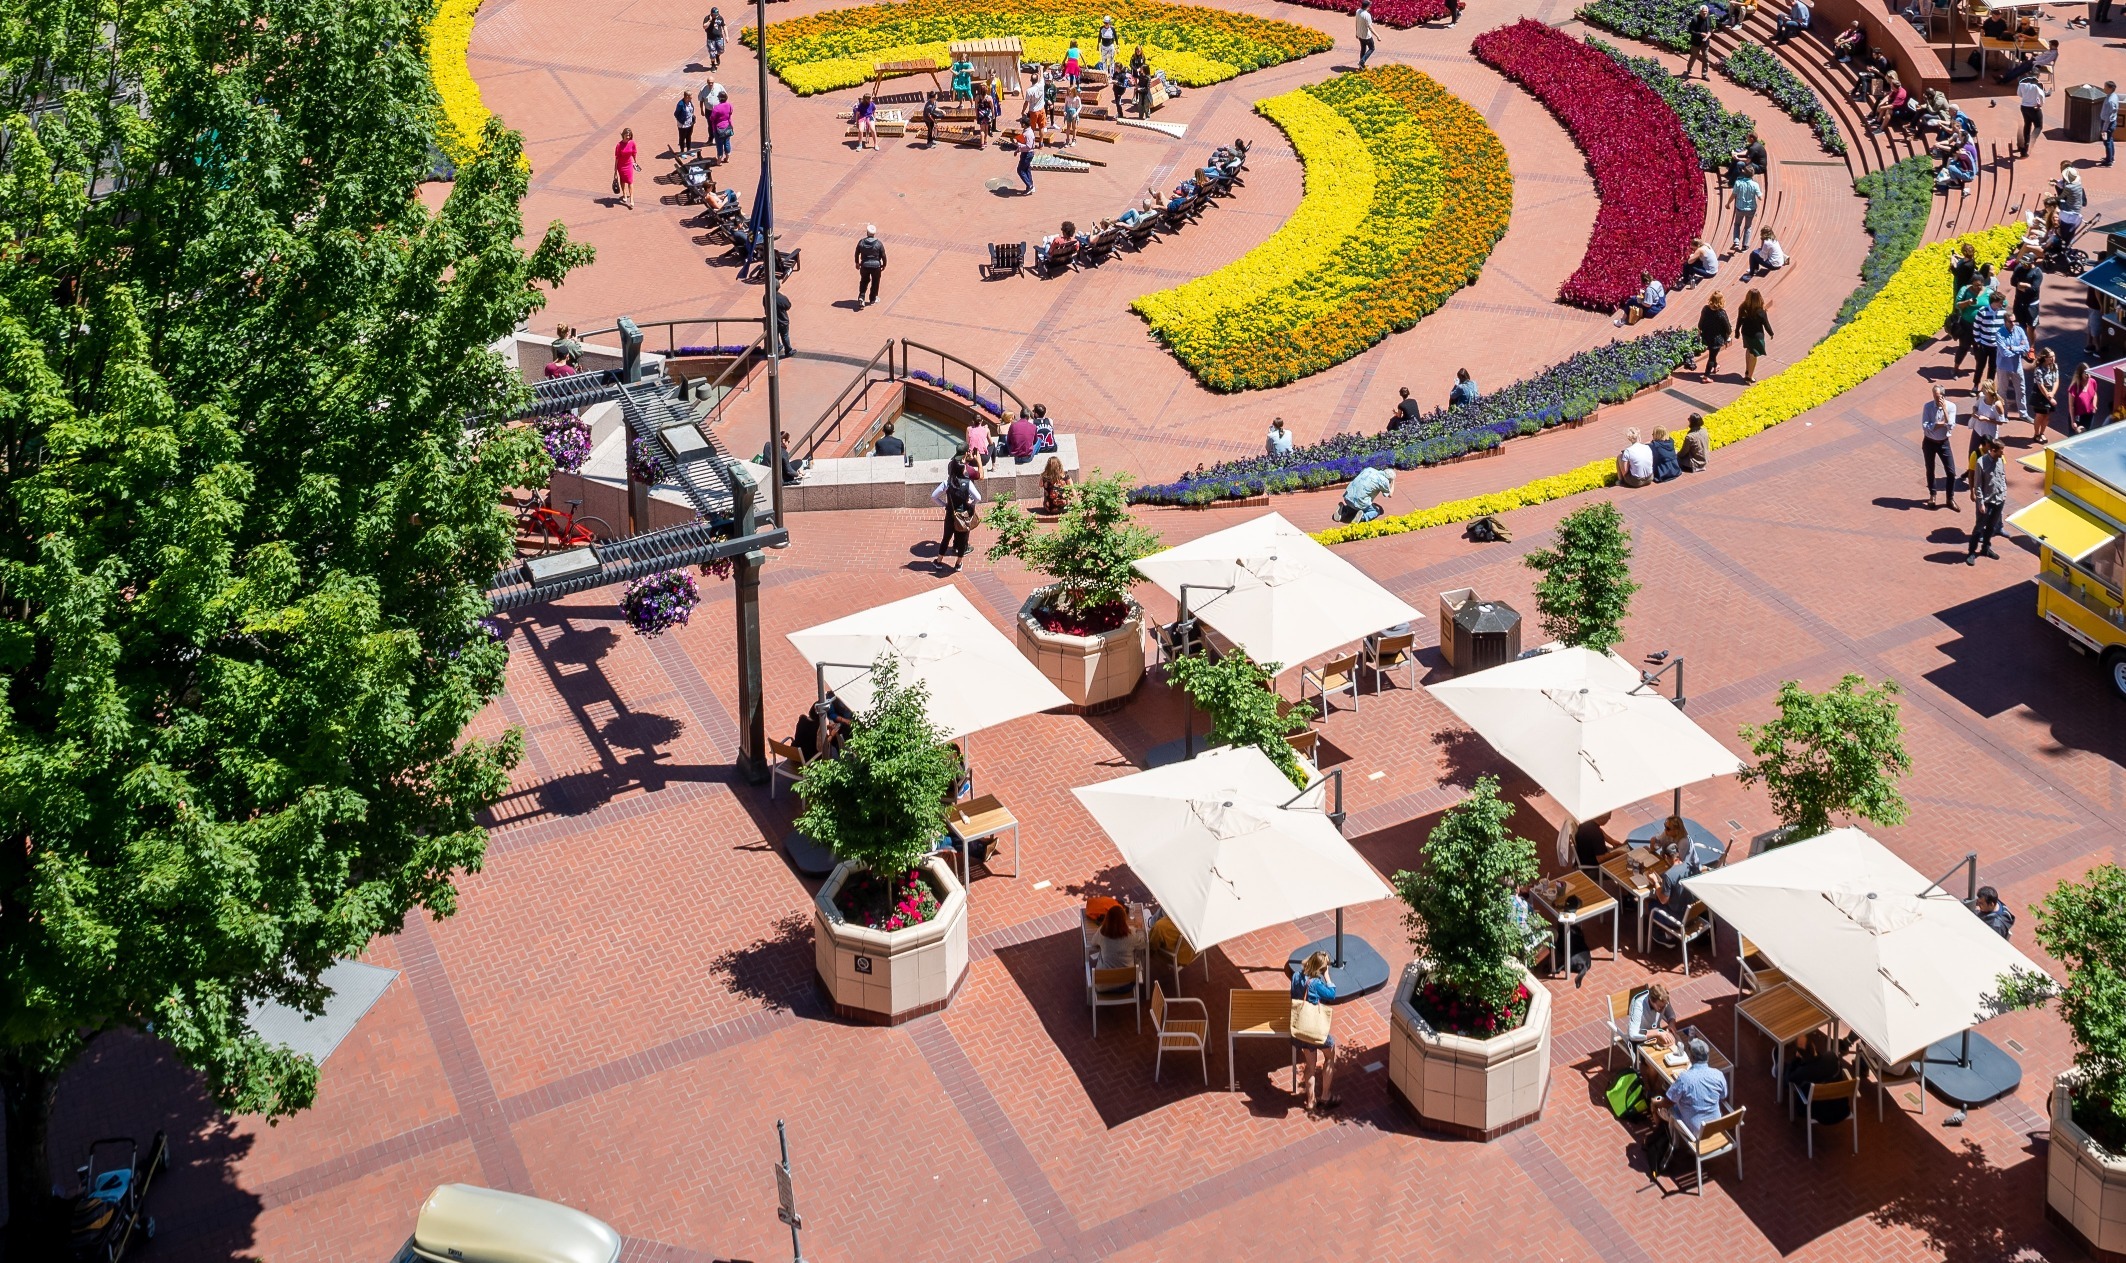 Pioneer Courthouse Square and IKEA Portland Continue Their Partnership!